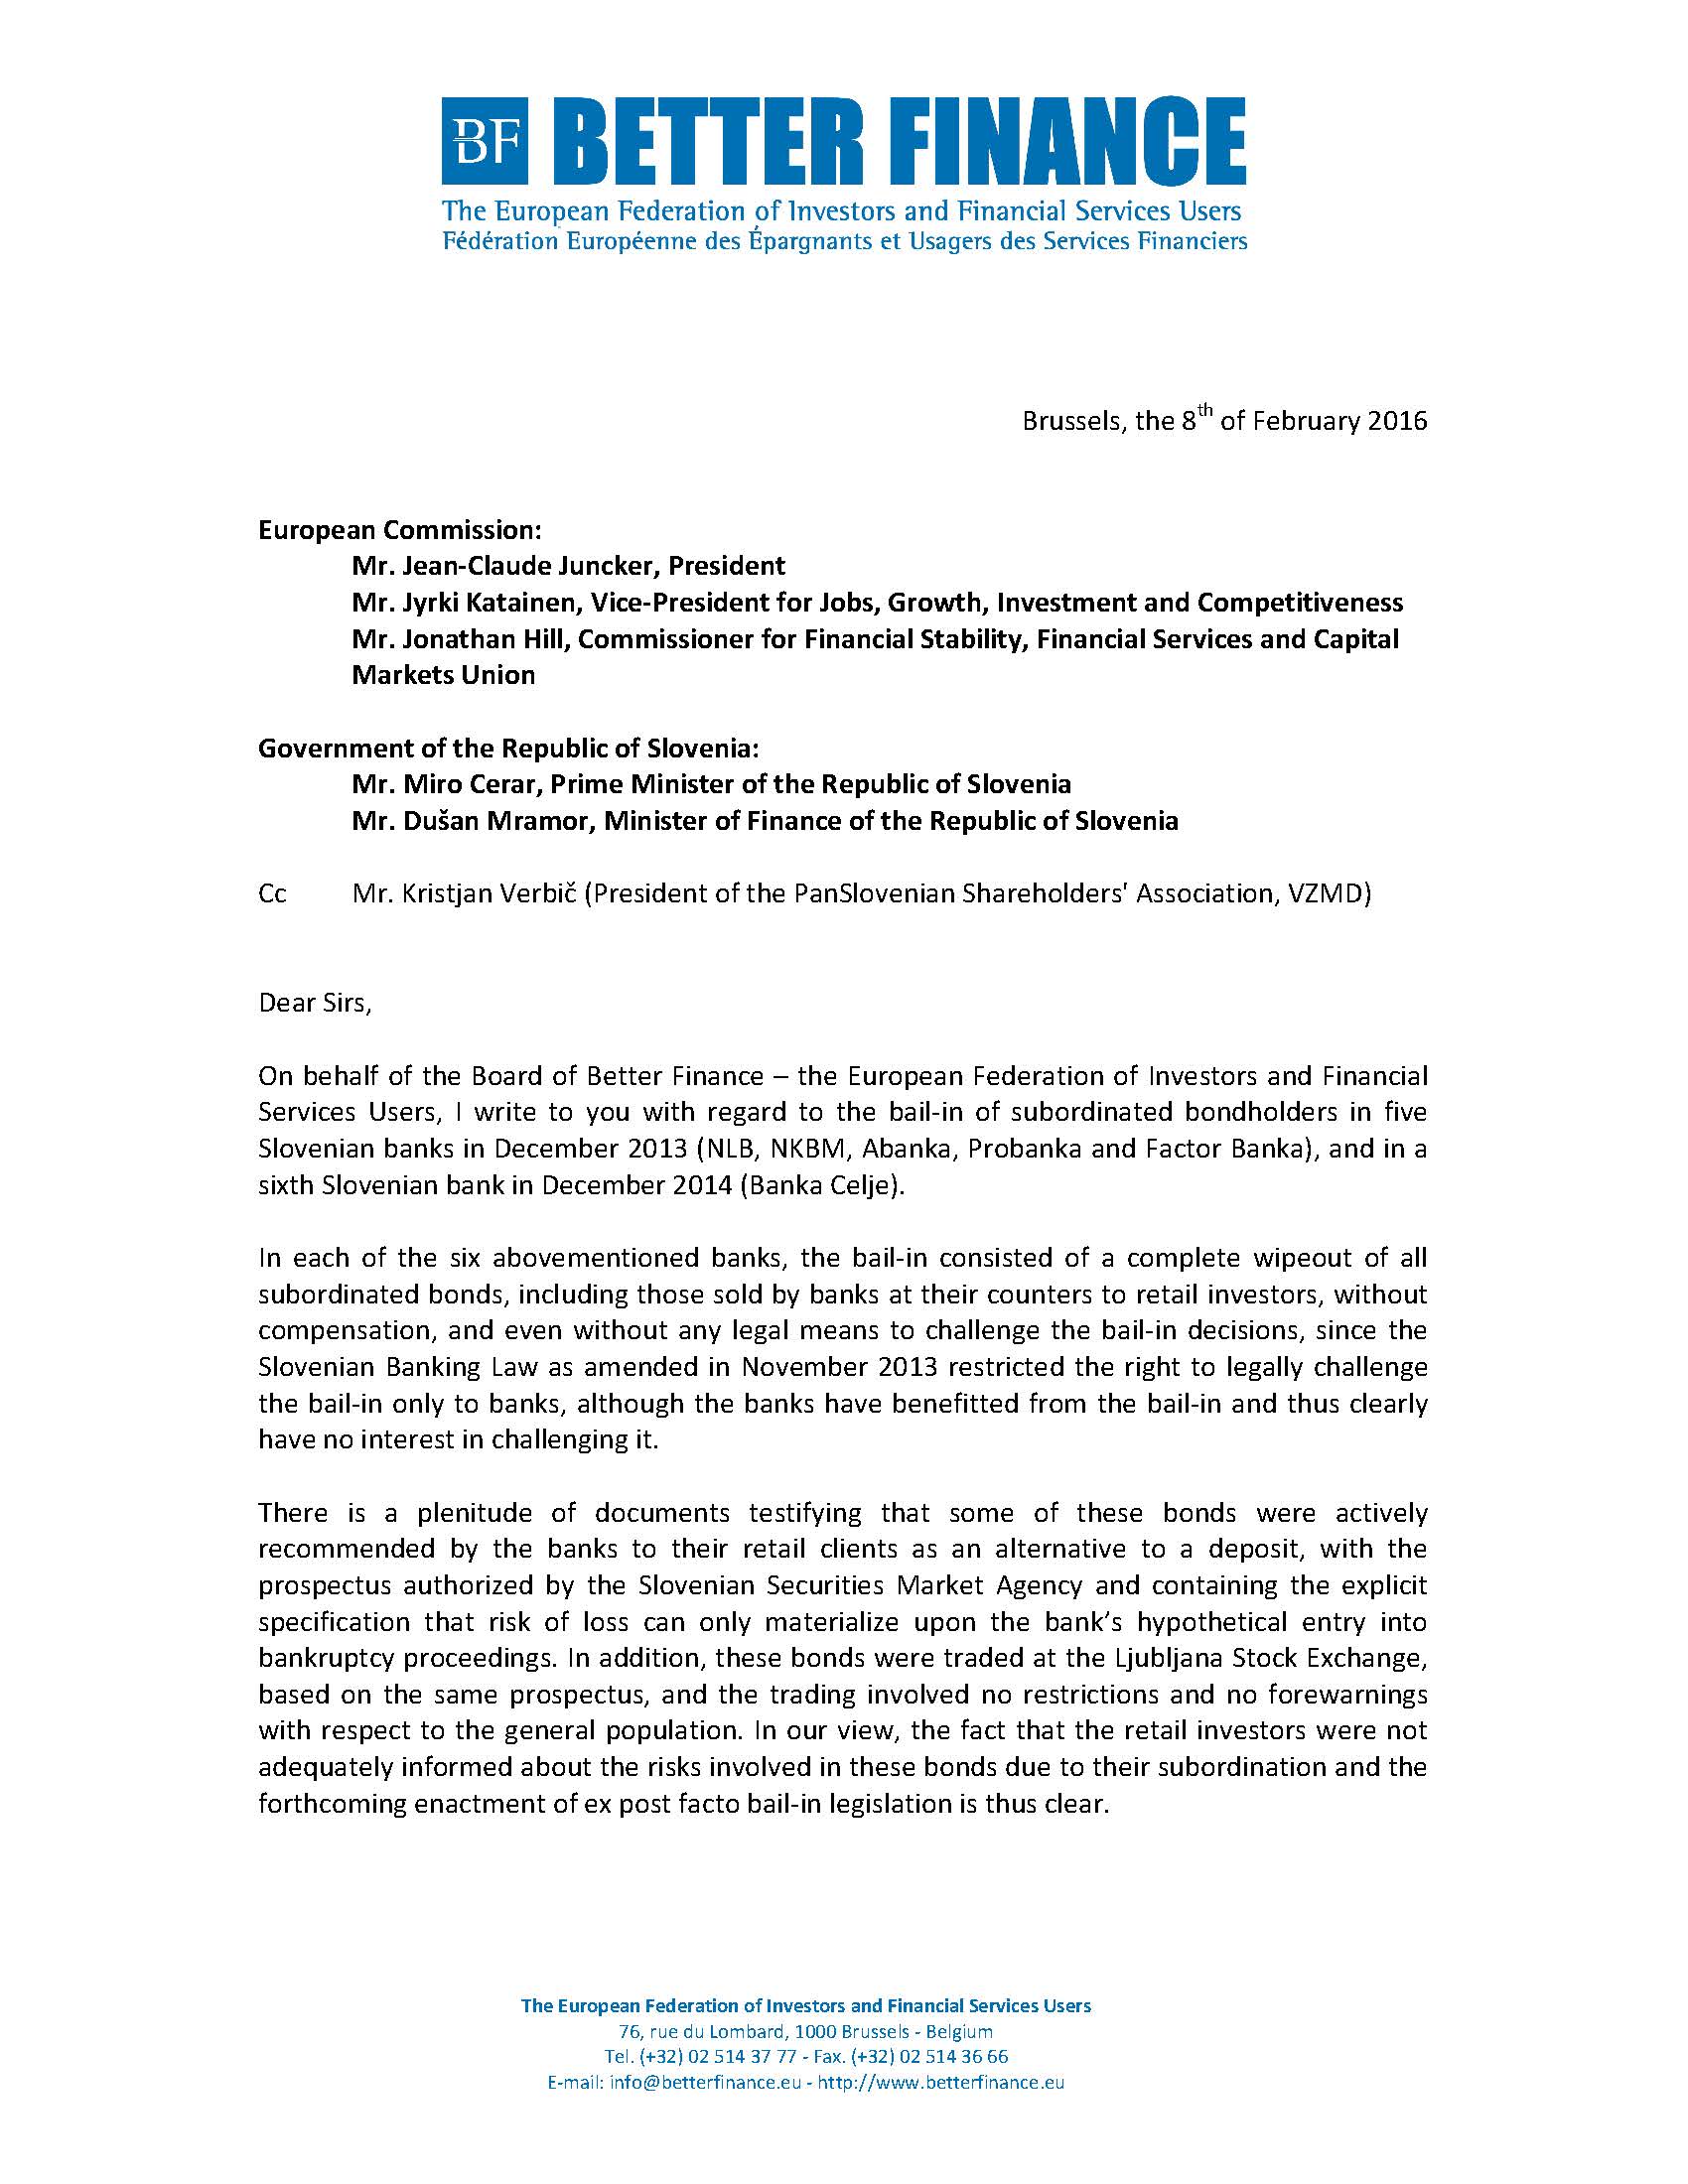 Better_Finance_letter_to_EC_and_Government_of_Slovenia